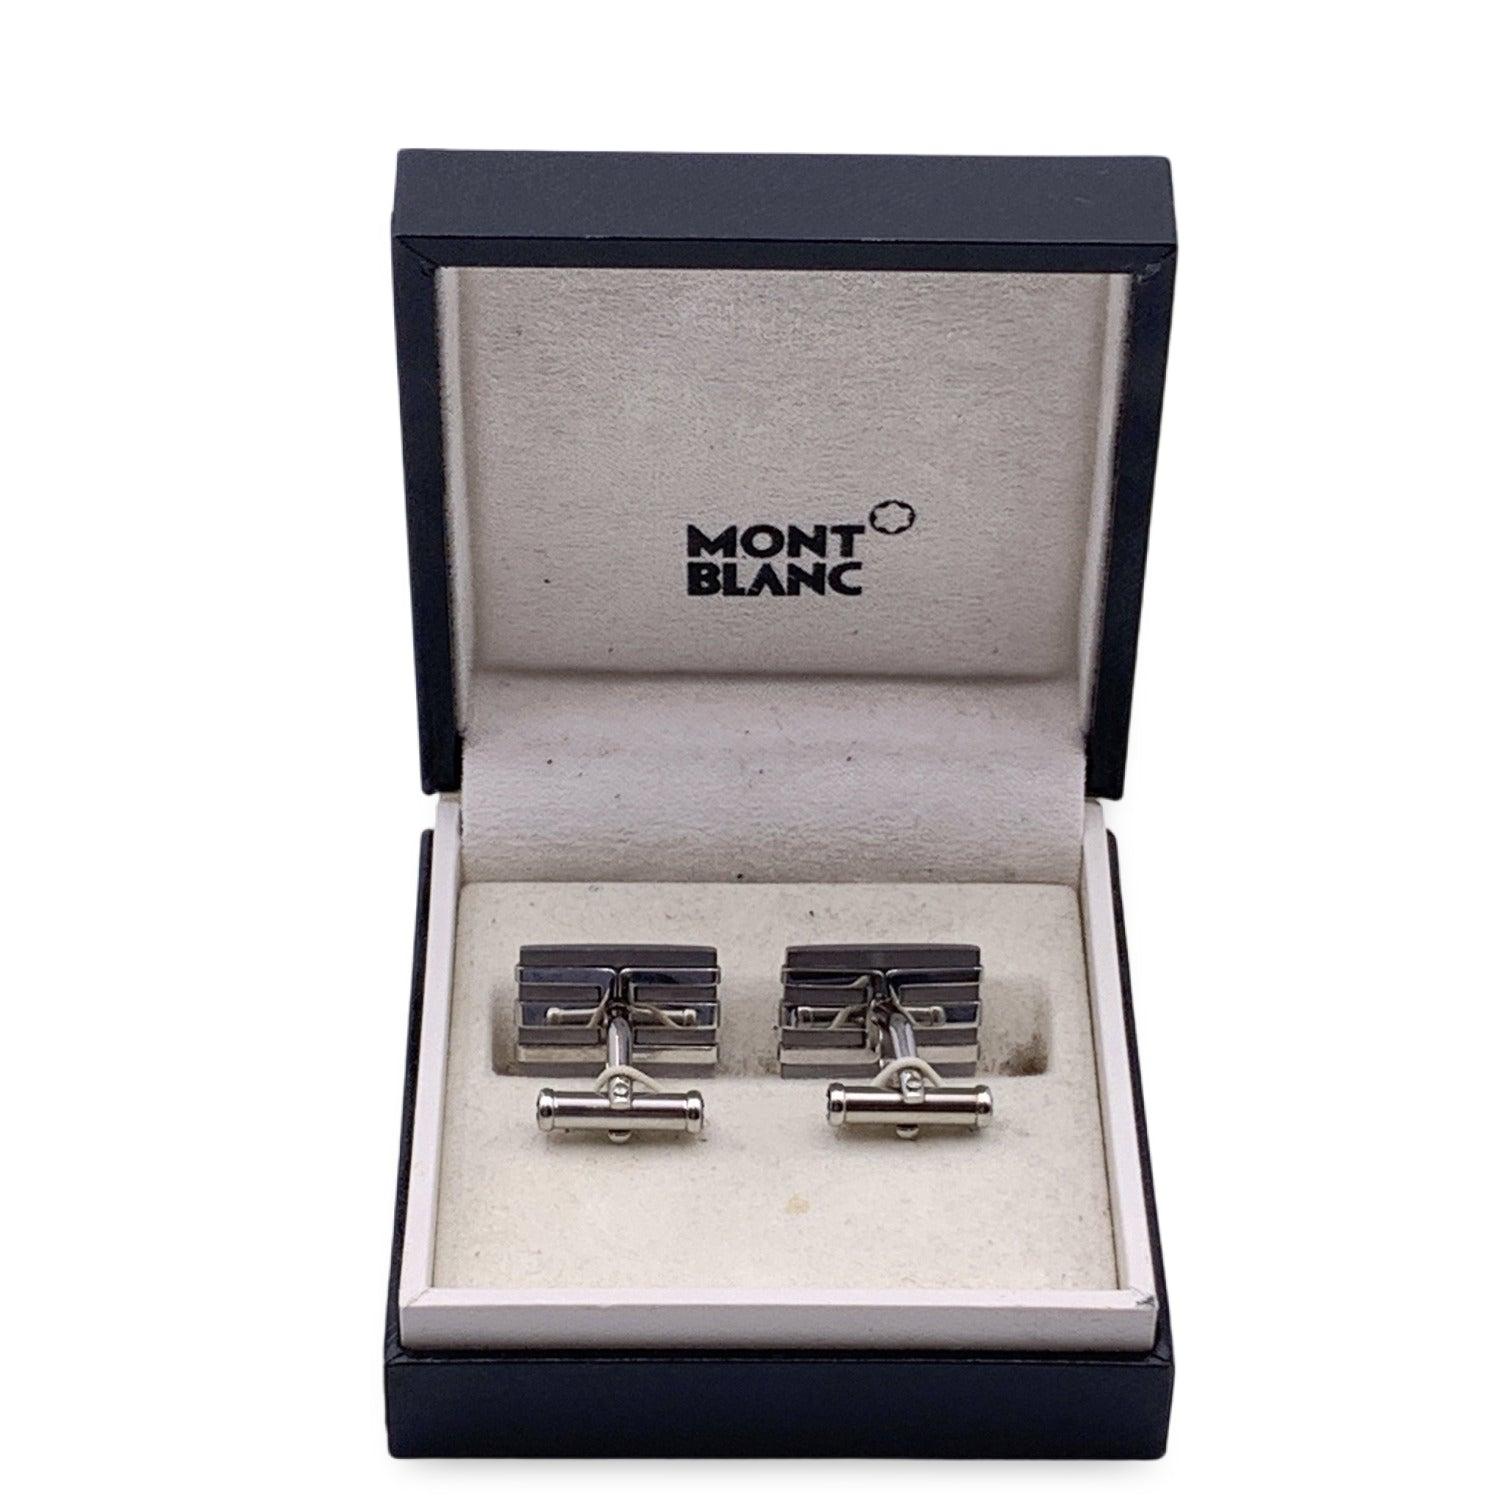 Beautiful Montblanc silver metal cufflinks. They feature striped design and Montblanc signatures on the front. Front width: 0.75nch - 2 cm. Condition A - EXCELLENT Gently used. Please, look carefully at the photos and ask for any detail. Details